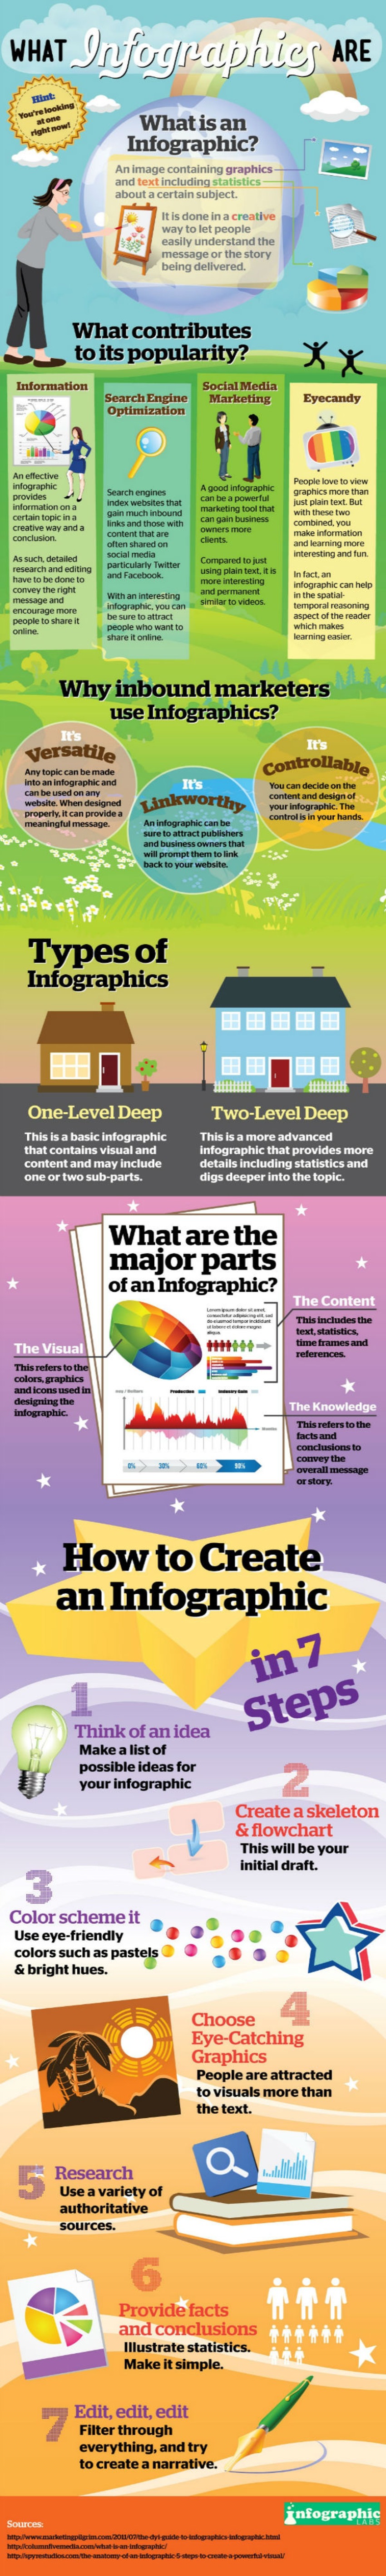 The What, Why & How of Infographic Creation [In an Infographic] | The MarTech Digest | Scoop.it